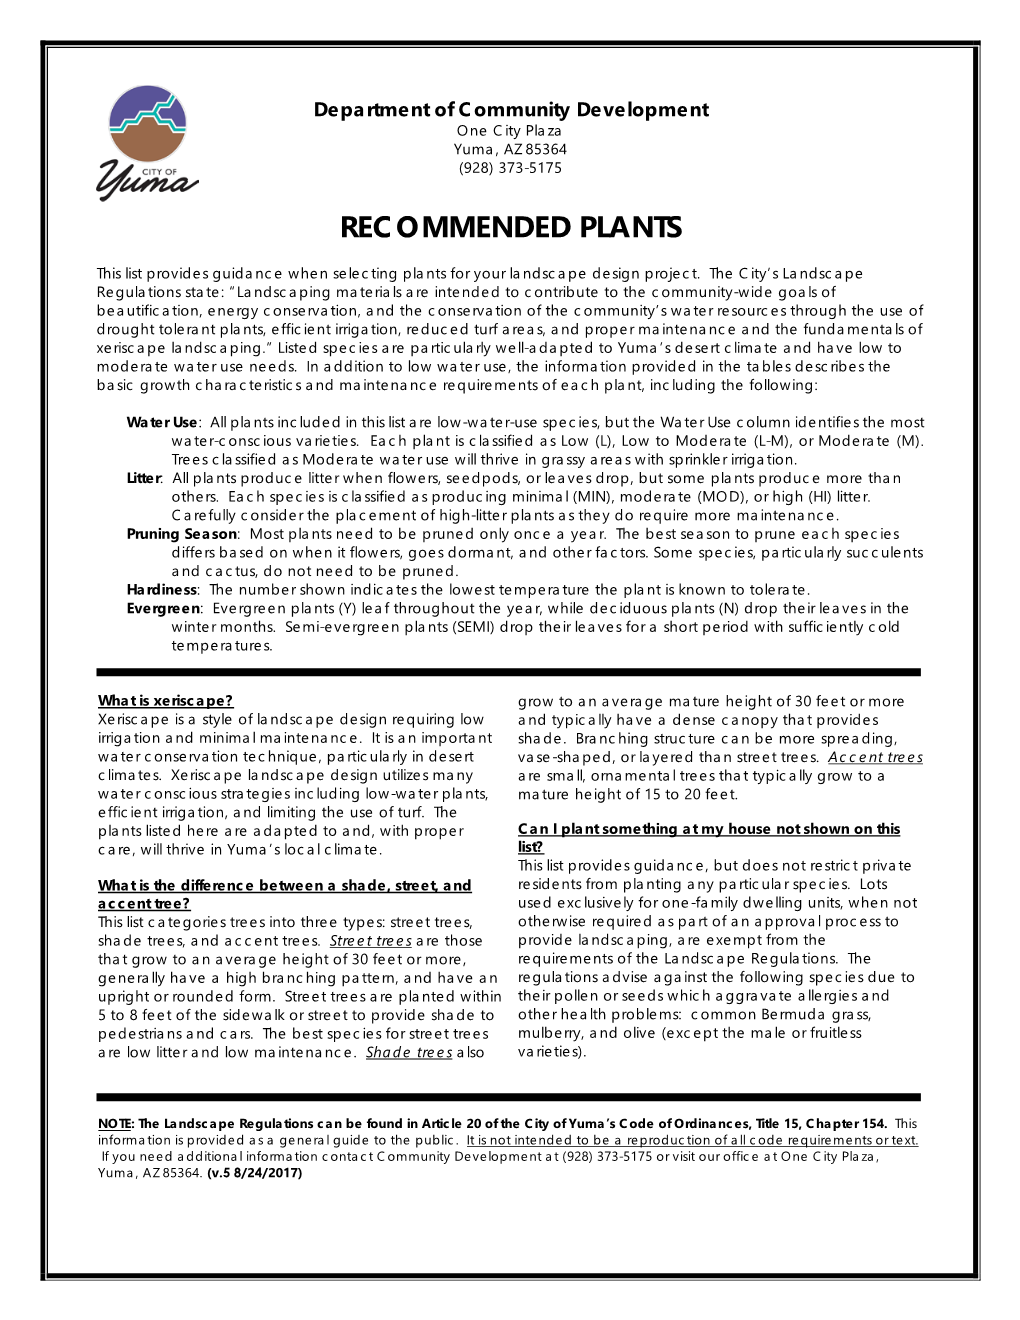 Recommended Plants